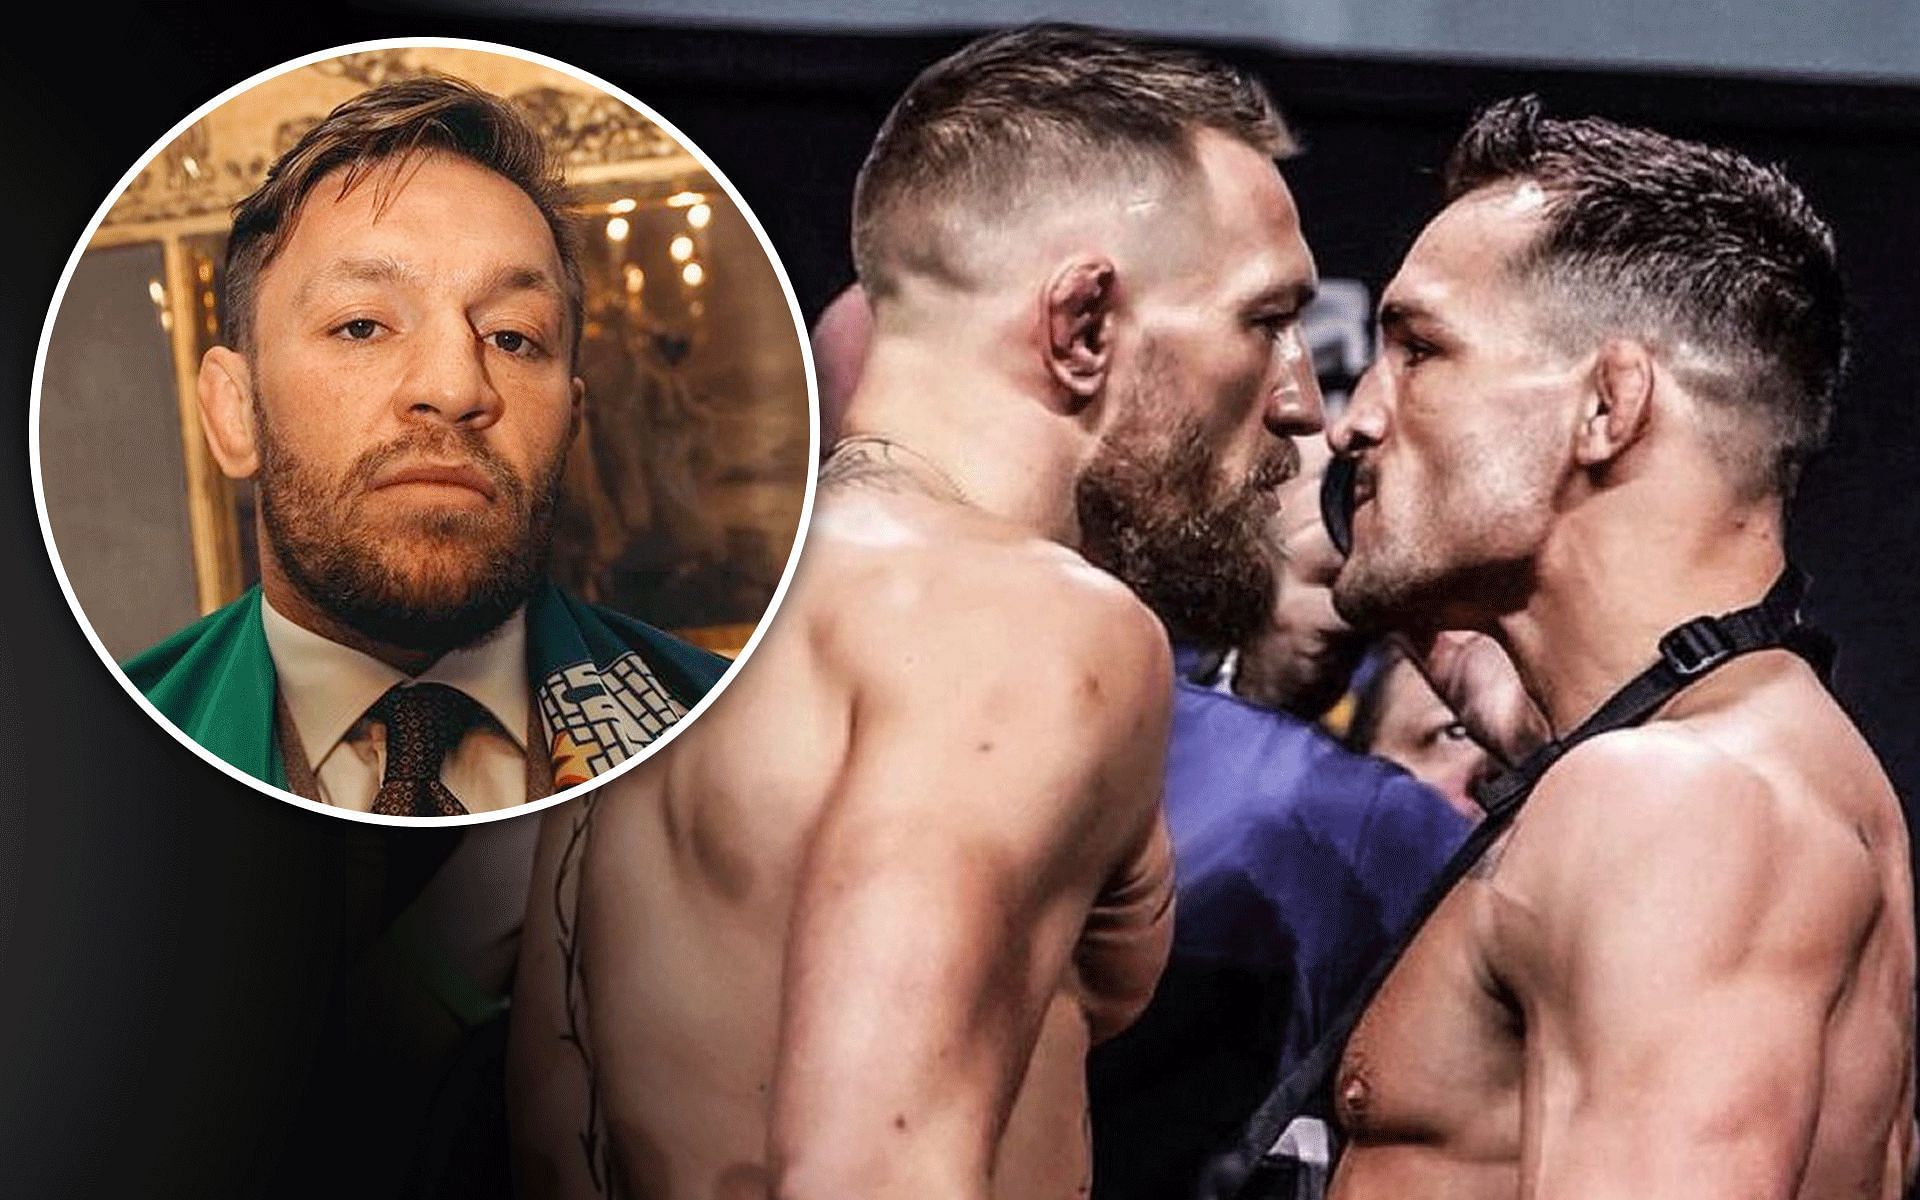 Conor McGregor says he will face Michael Chandler this summer [Images via: @mikechandlermma and @thenotoriousmma on Instagram]